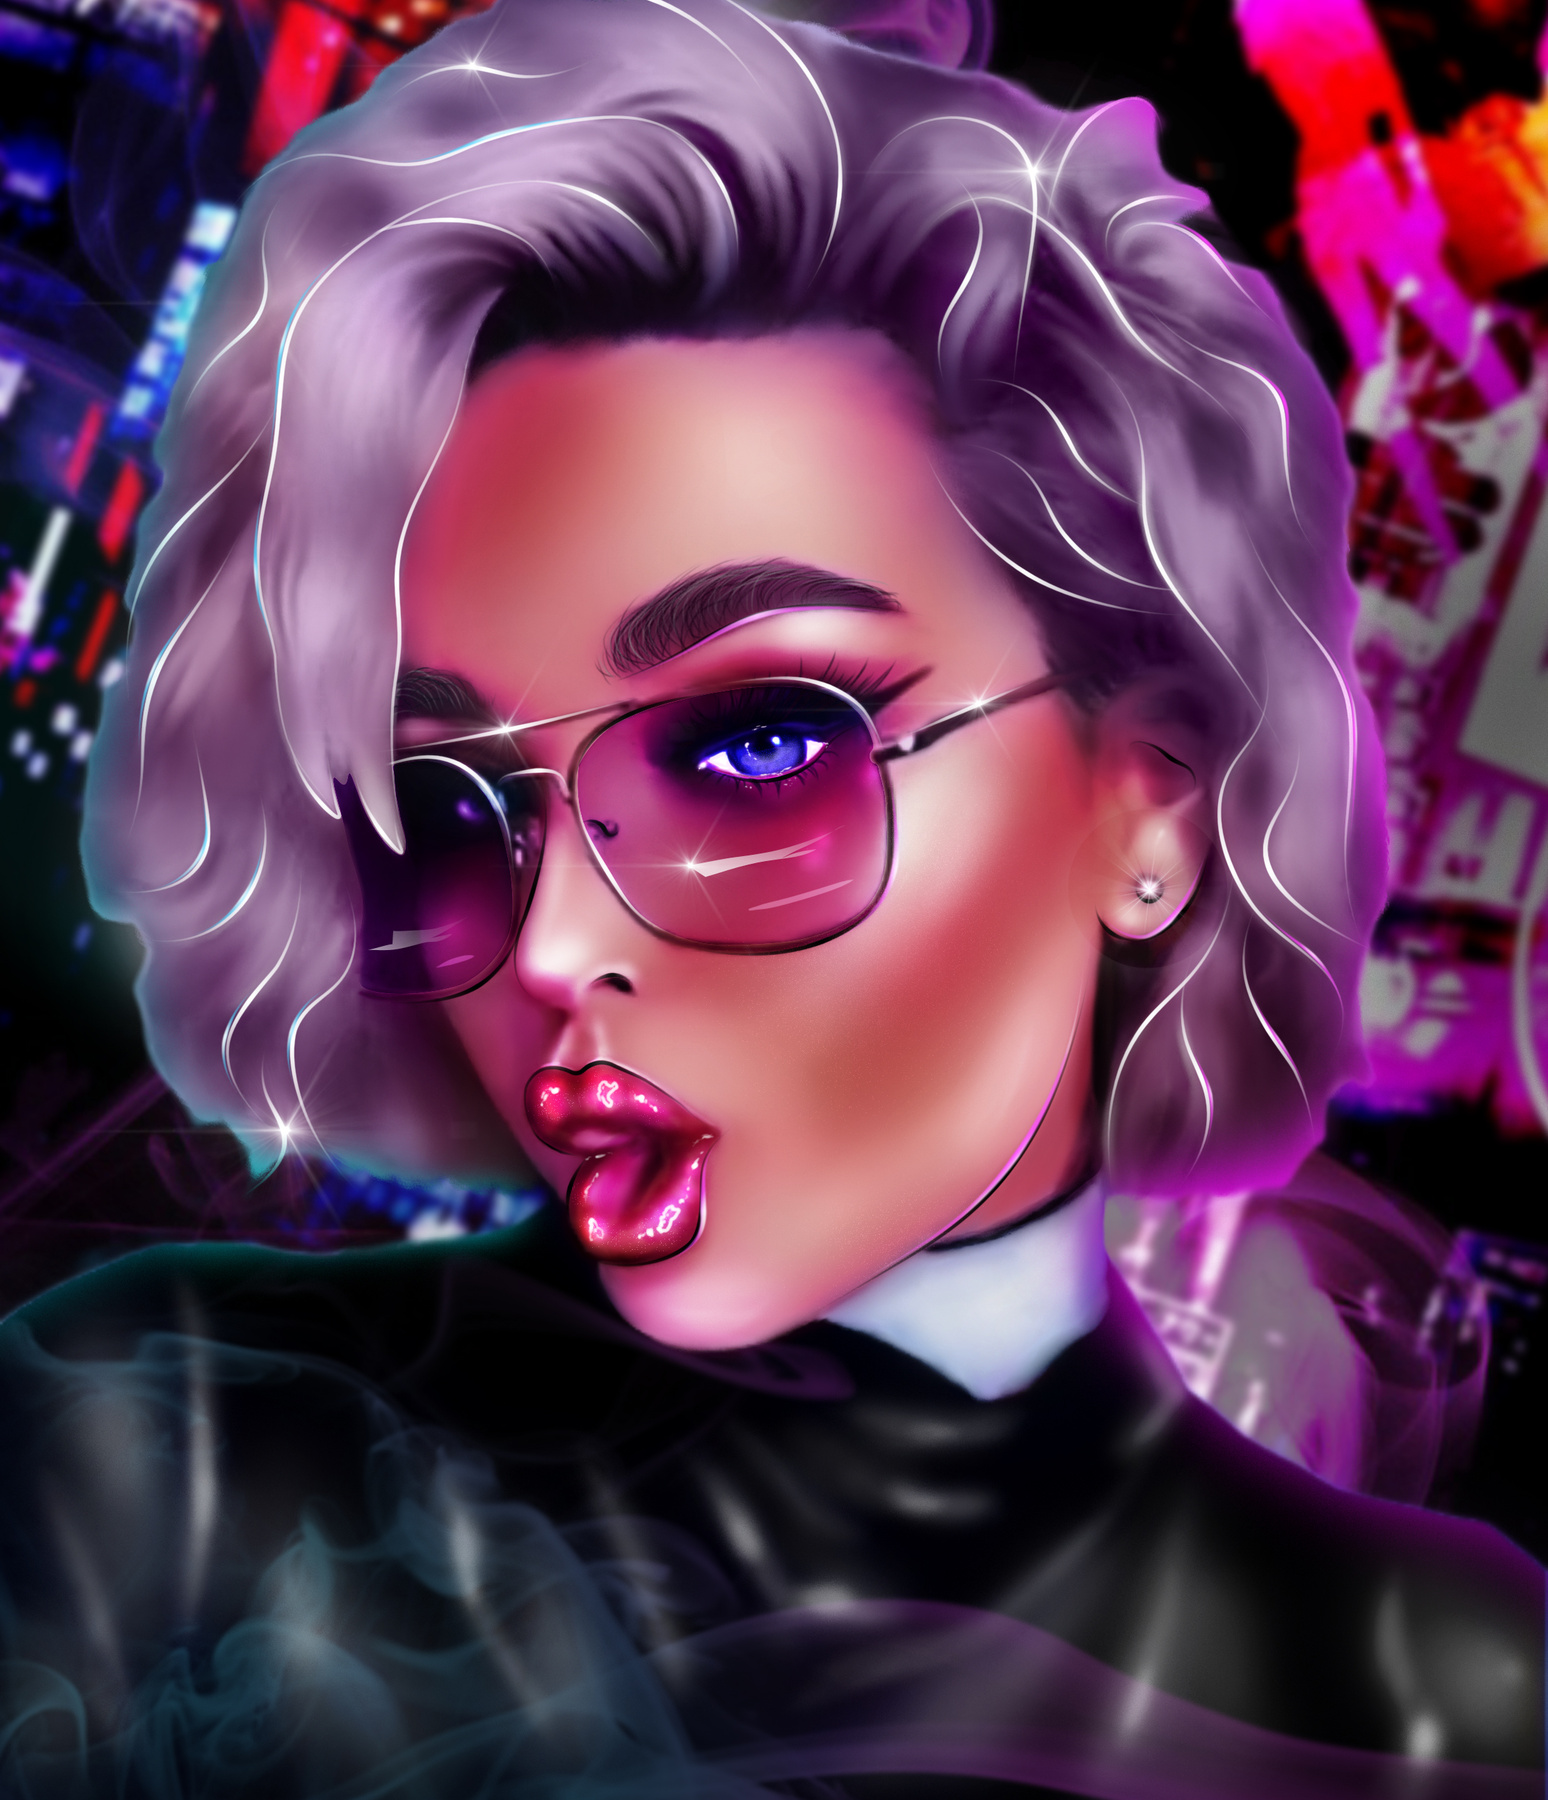 Fashionable girl with glasses in the neon fog. lighting face glasses model portrait woman beauty creative design fashion girl neon attractive charming cyberpunk dark delightful eyeglasses fog glitter hairstyle sexy stylish trendy young clip art digital illustration